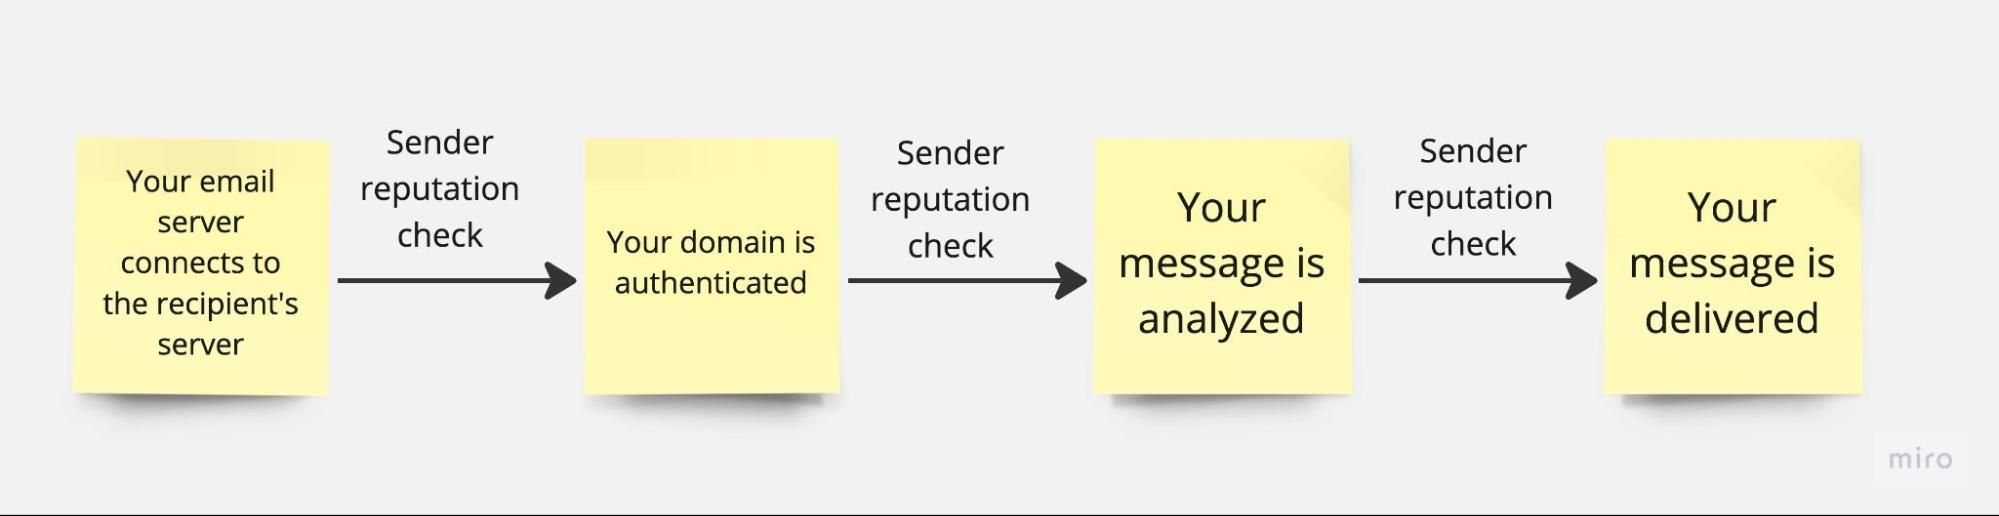 A diagram showing how sender reputation checks can be executed at various stages of the email delivery process